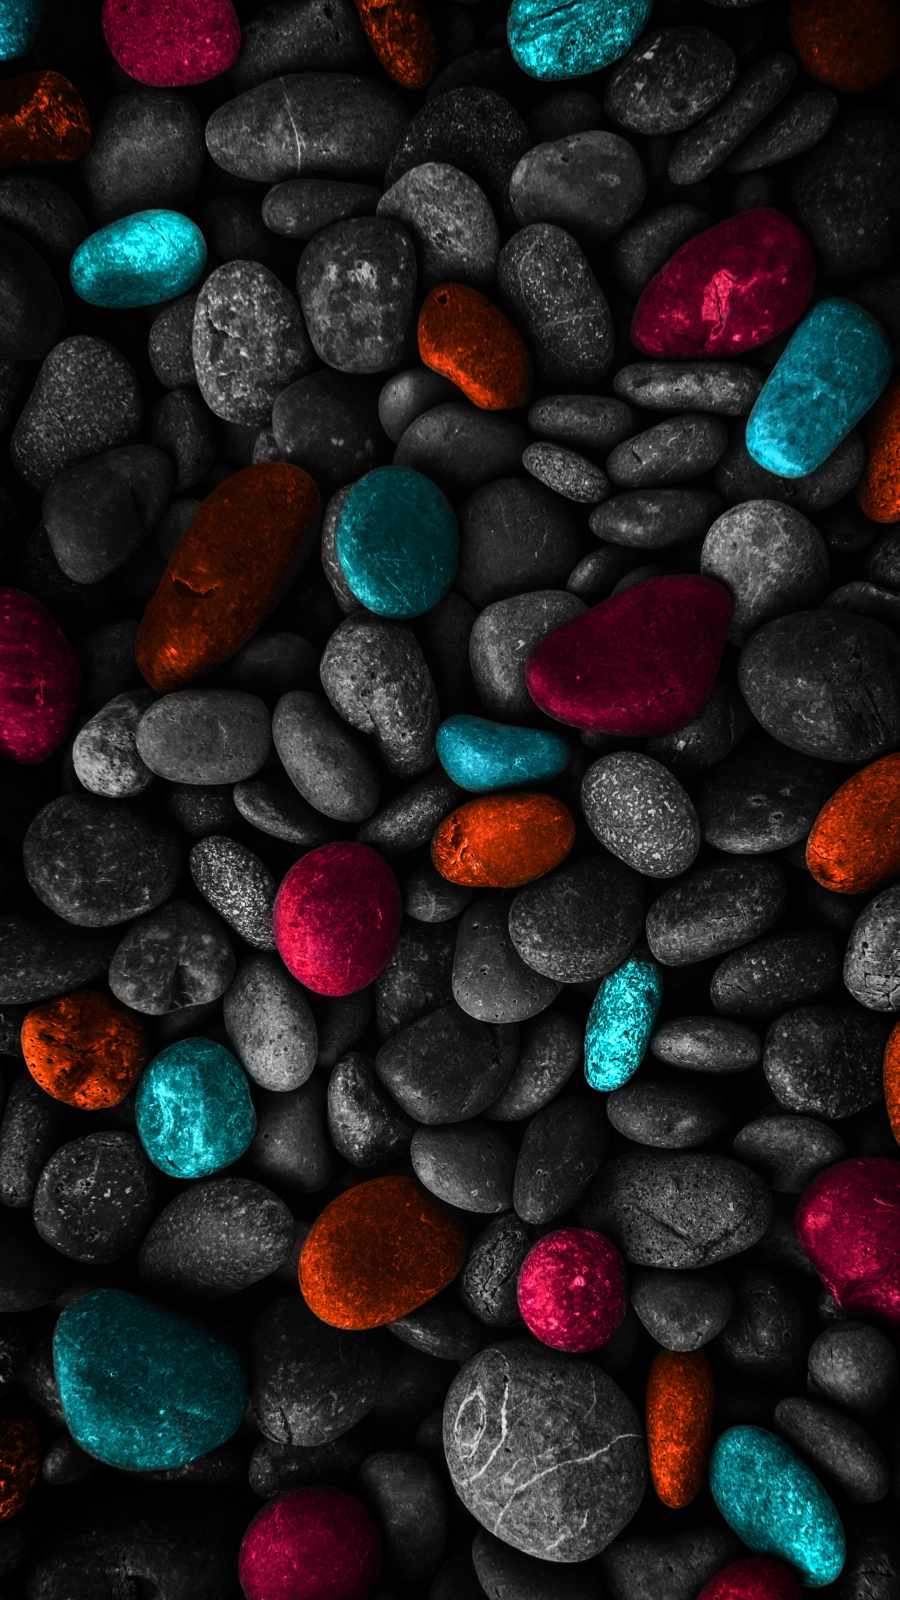 Colorful Pebbles Stones - IPhone Wallpapers : iPhone Wallpapers